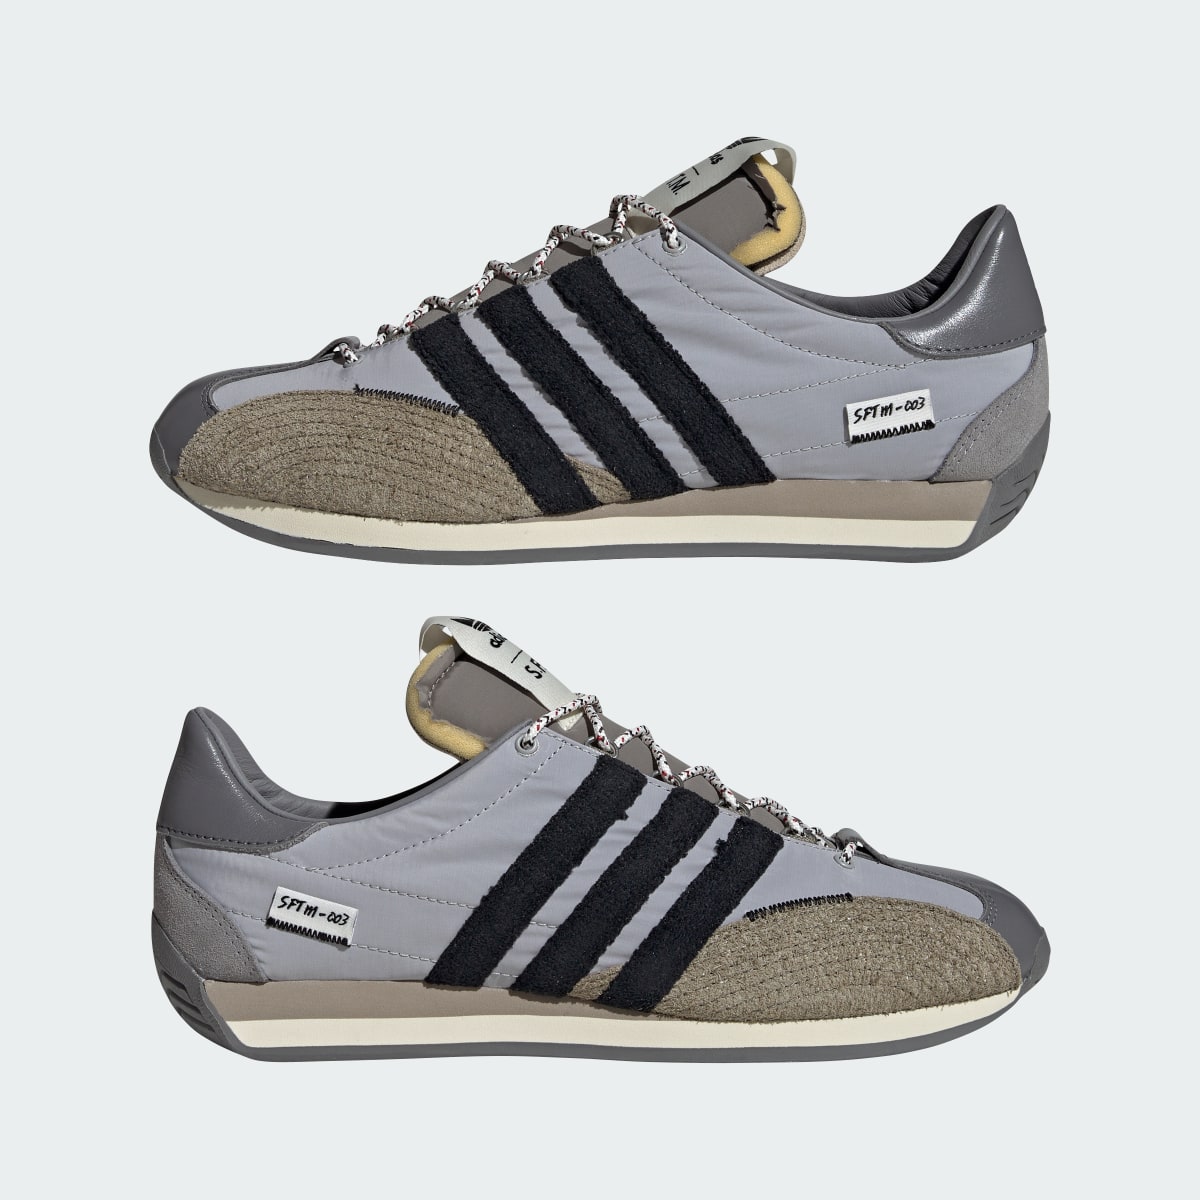 Adidas SFTM Country OG Low Trainers. 9